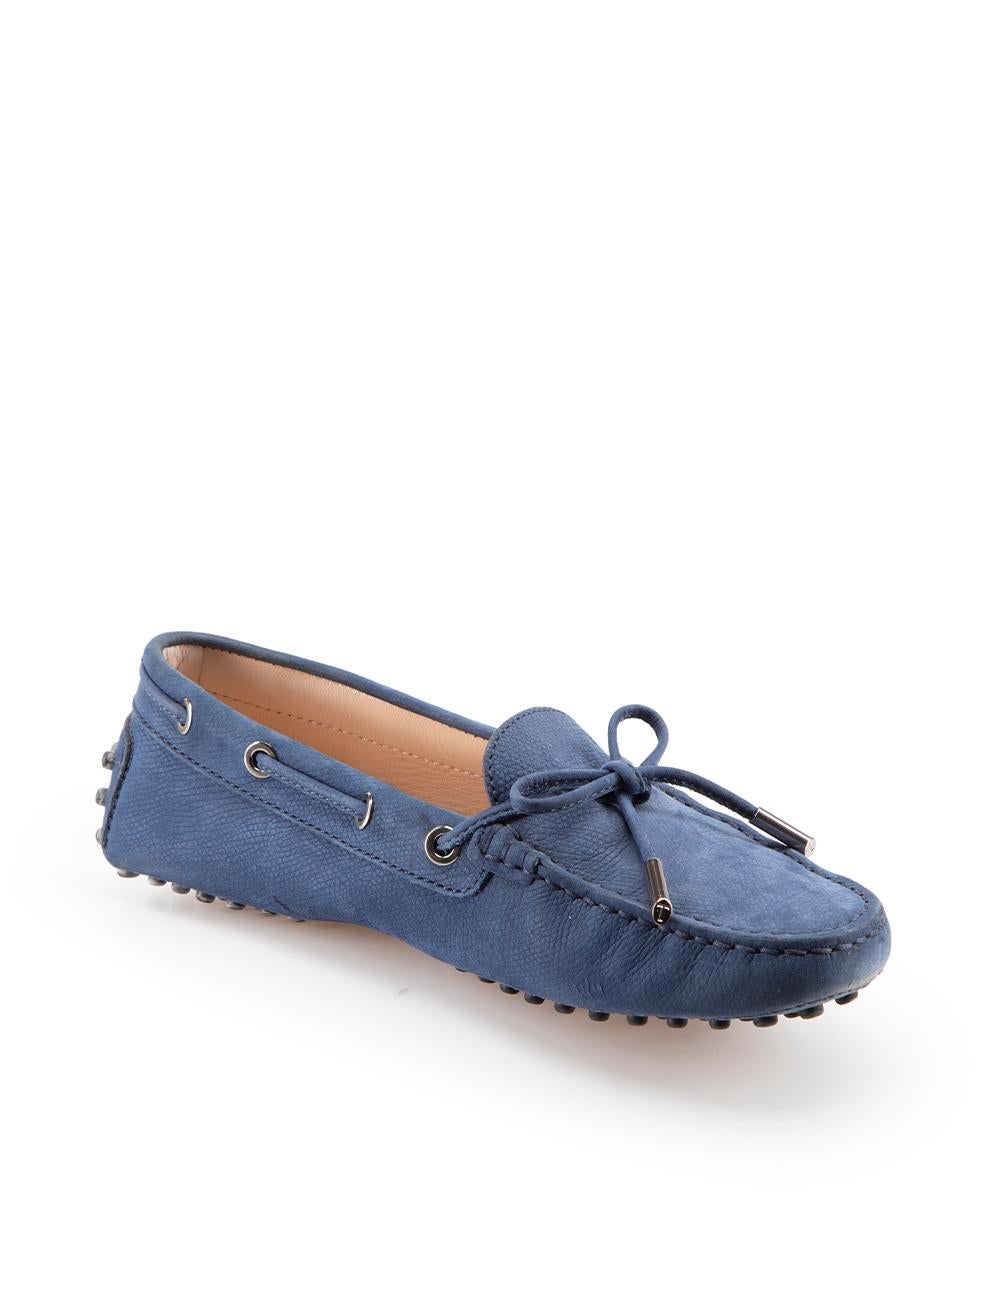 CONDITION is Very good. Minimal wear to shoes is evident. Minimal wear to both toes with light abrasion to the suede on this used Tod's designer resale item. These shoes come with original box.
  
Details
Blue
Suede
Loafers
Slip on
Bow detail
Round